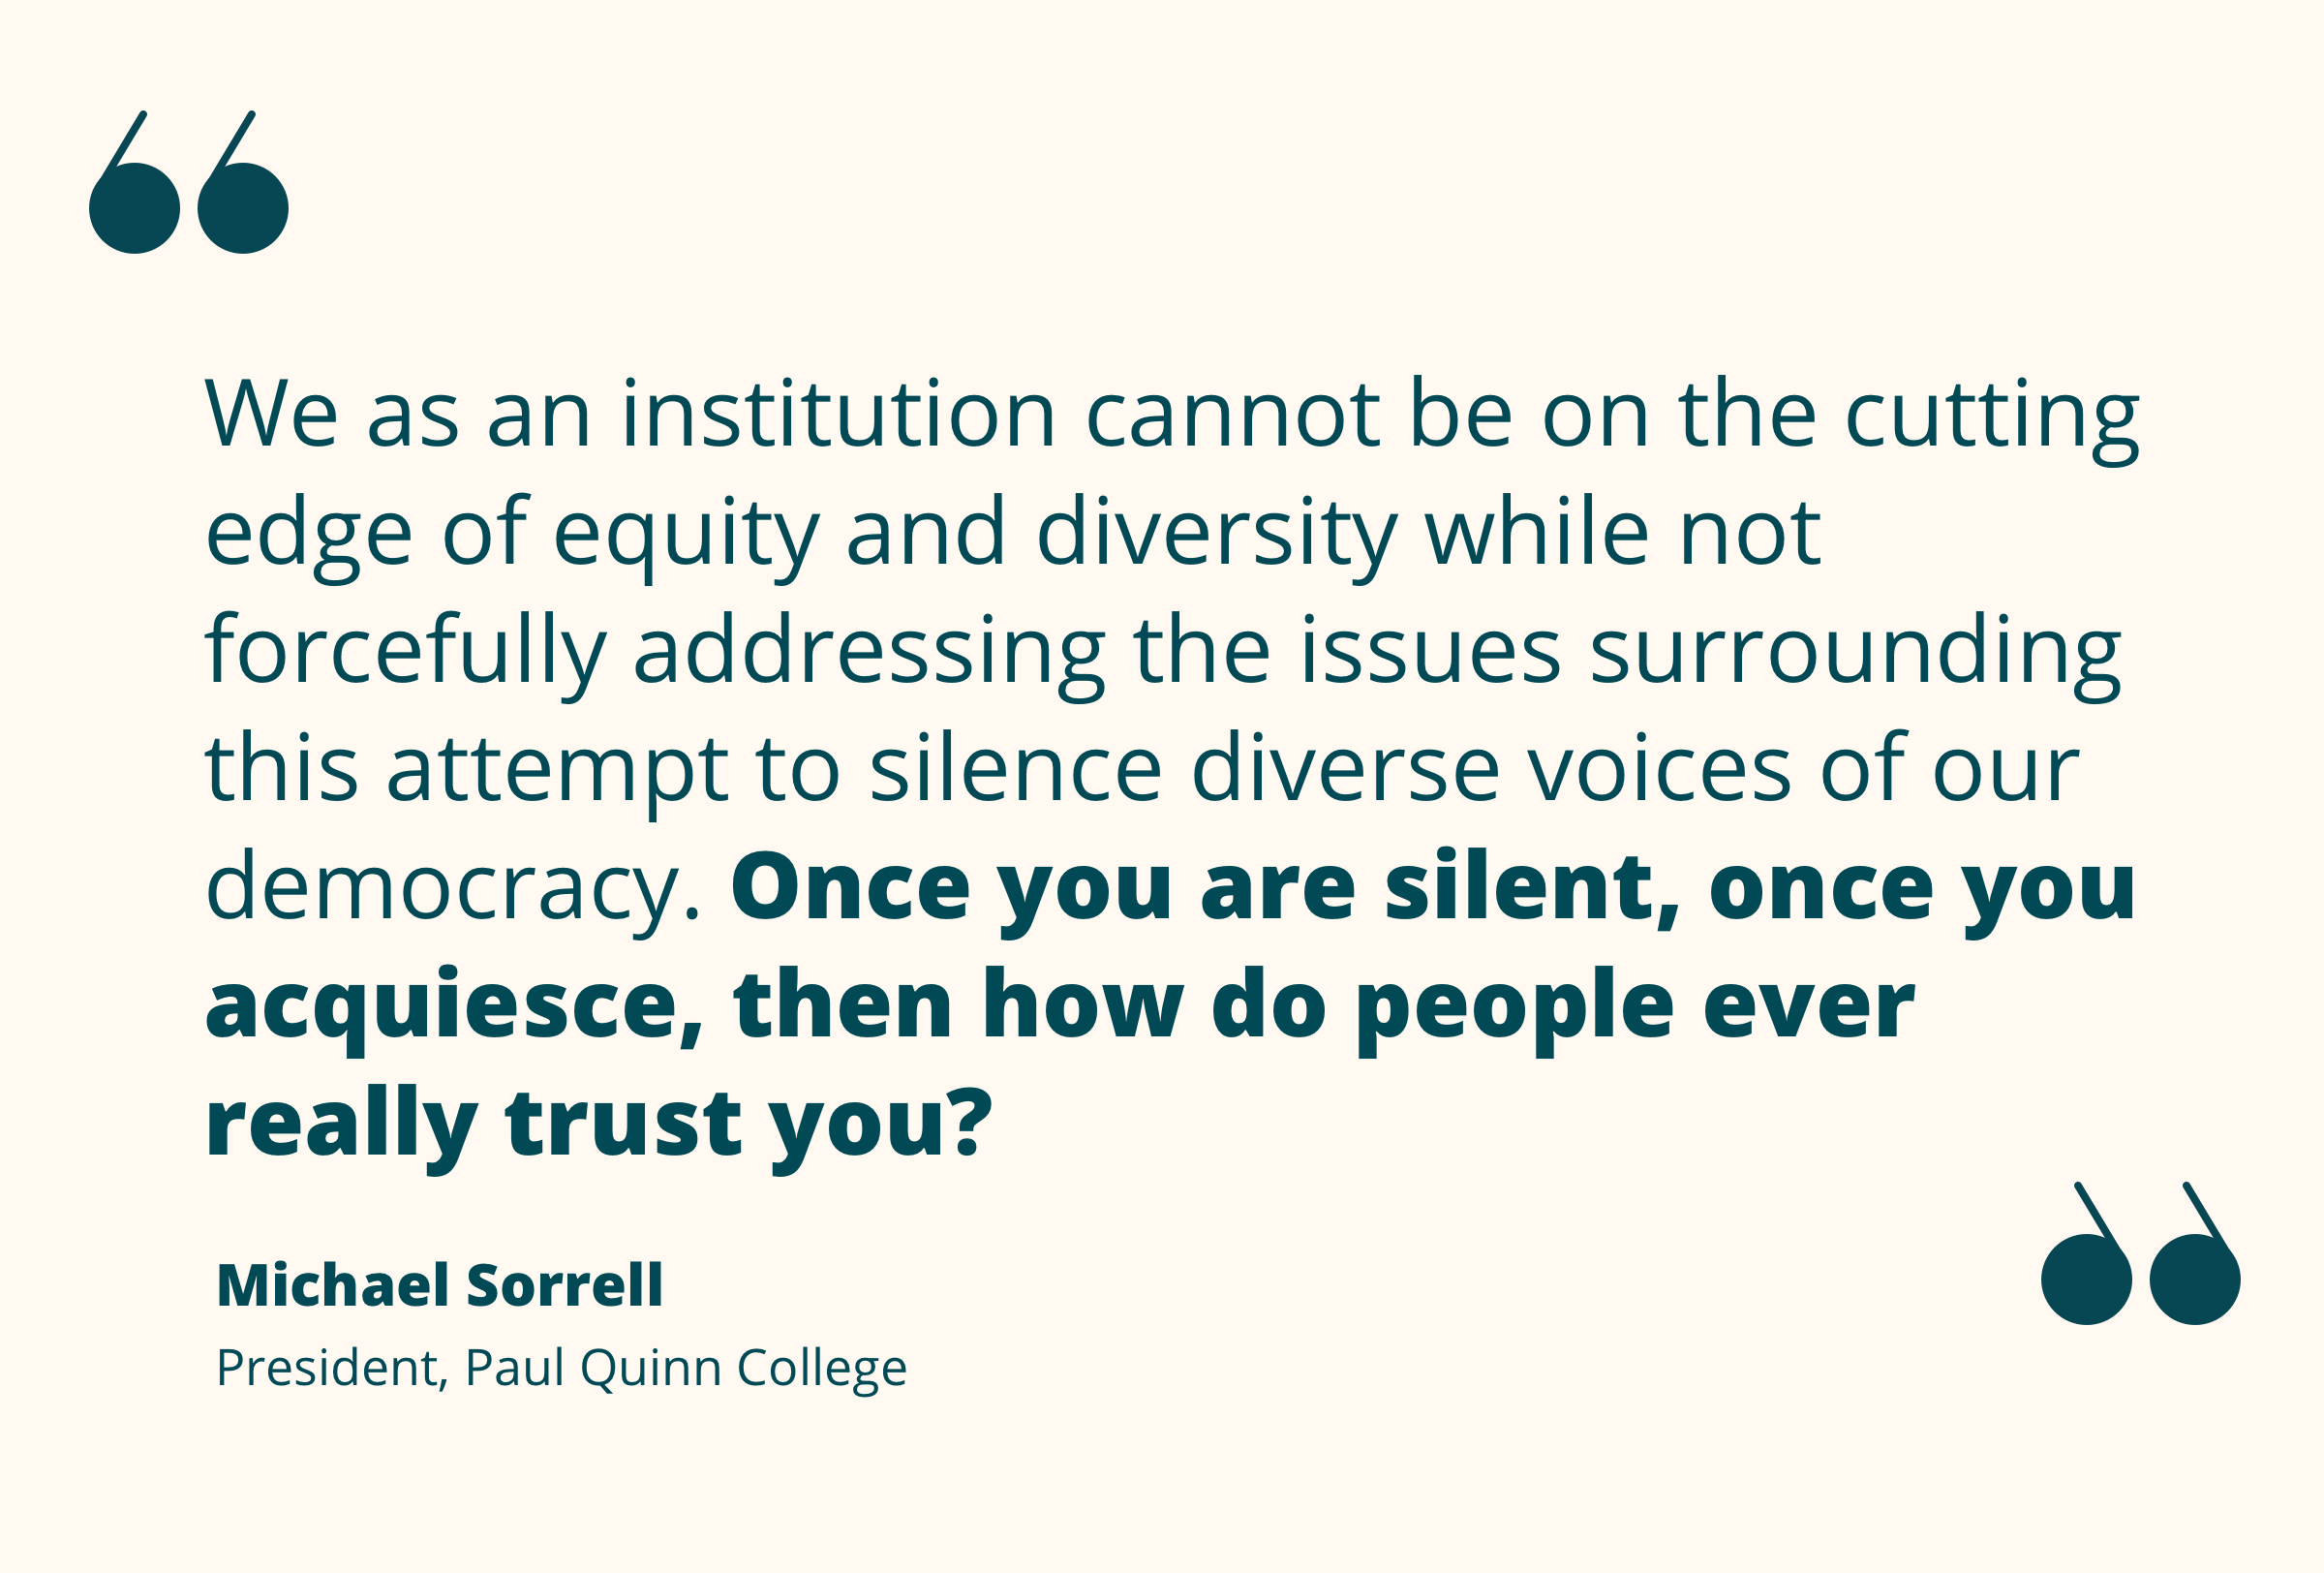 Quote from Michael Sorrell re higher ed's moral responsibility to resist attempts at silencing democracy’s diverse voices.